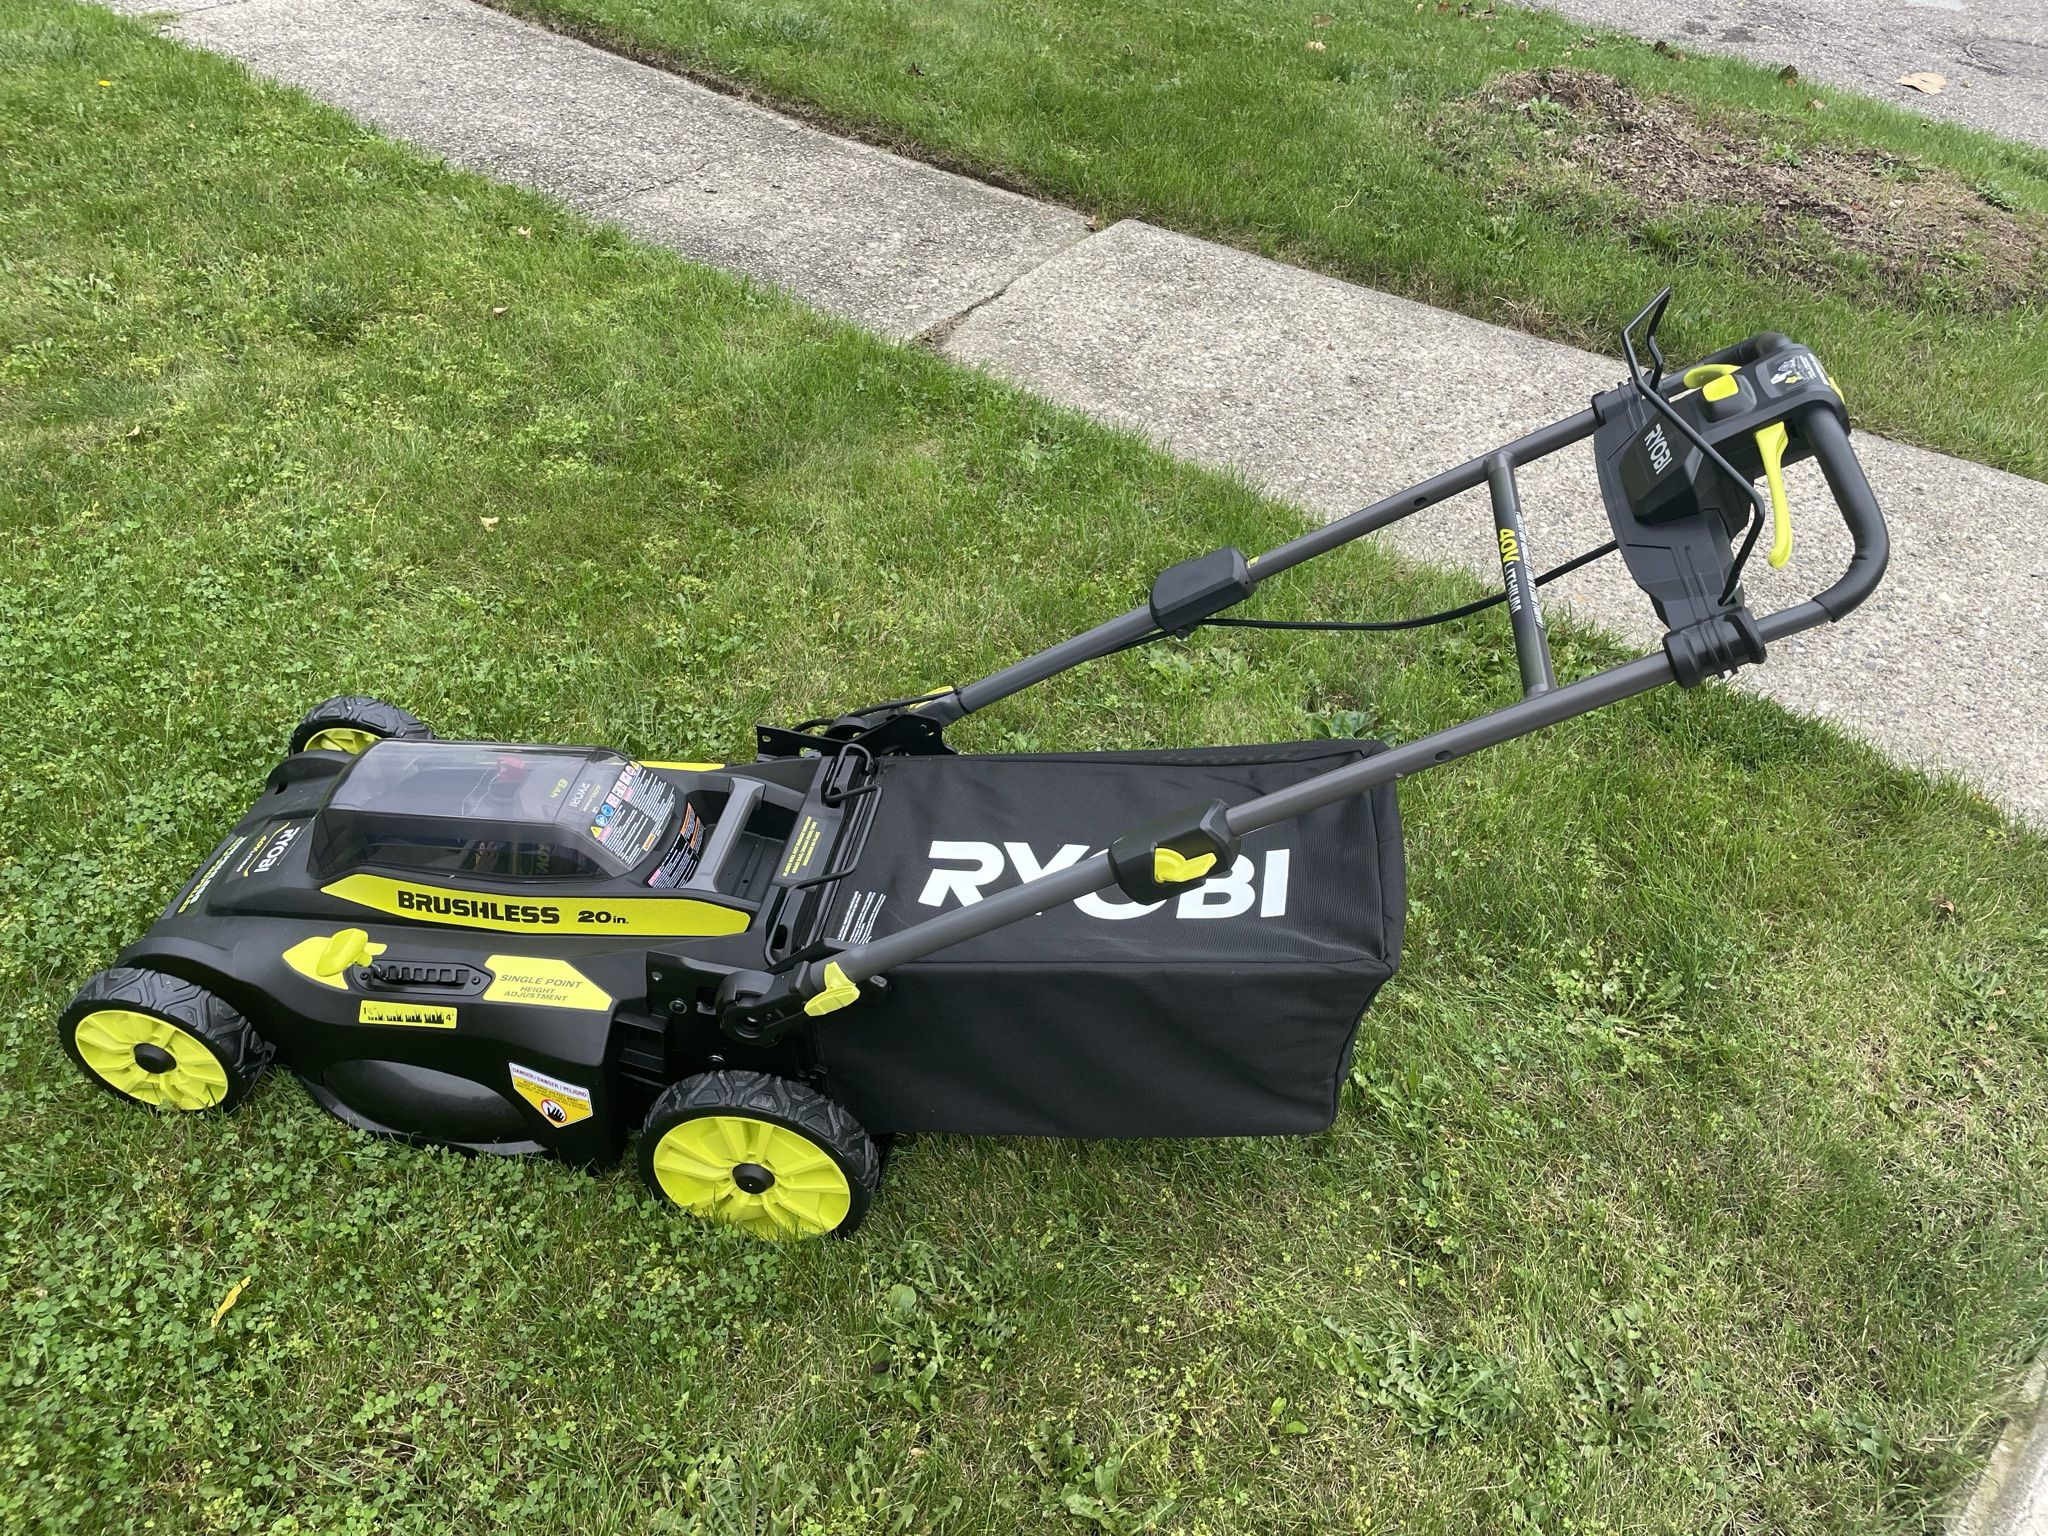 40V Brushless 20 in. Cordless Walk Behind Self-Propelled Lawn Mower with 6.0 Ah Battery & Charger